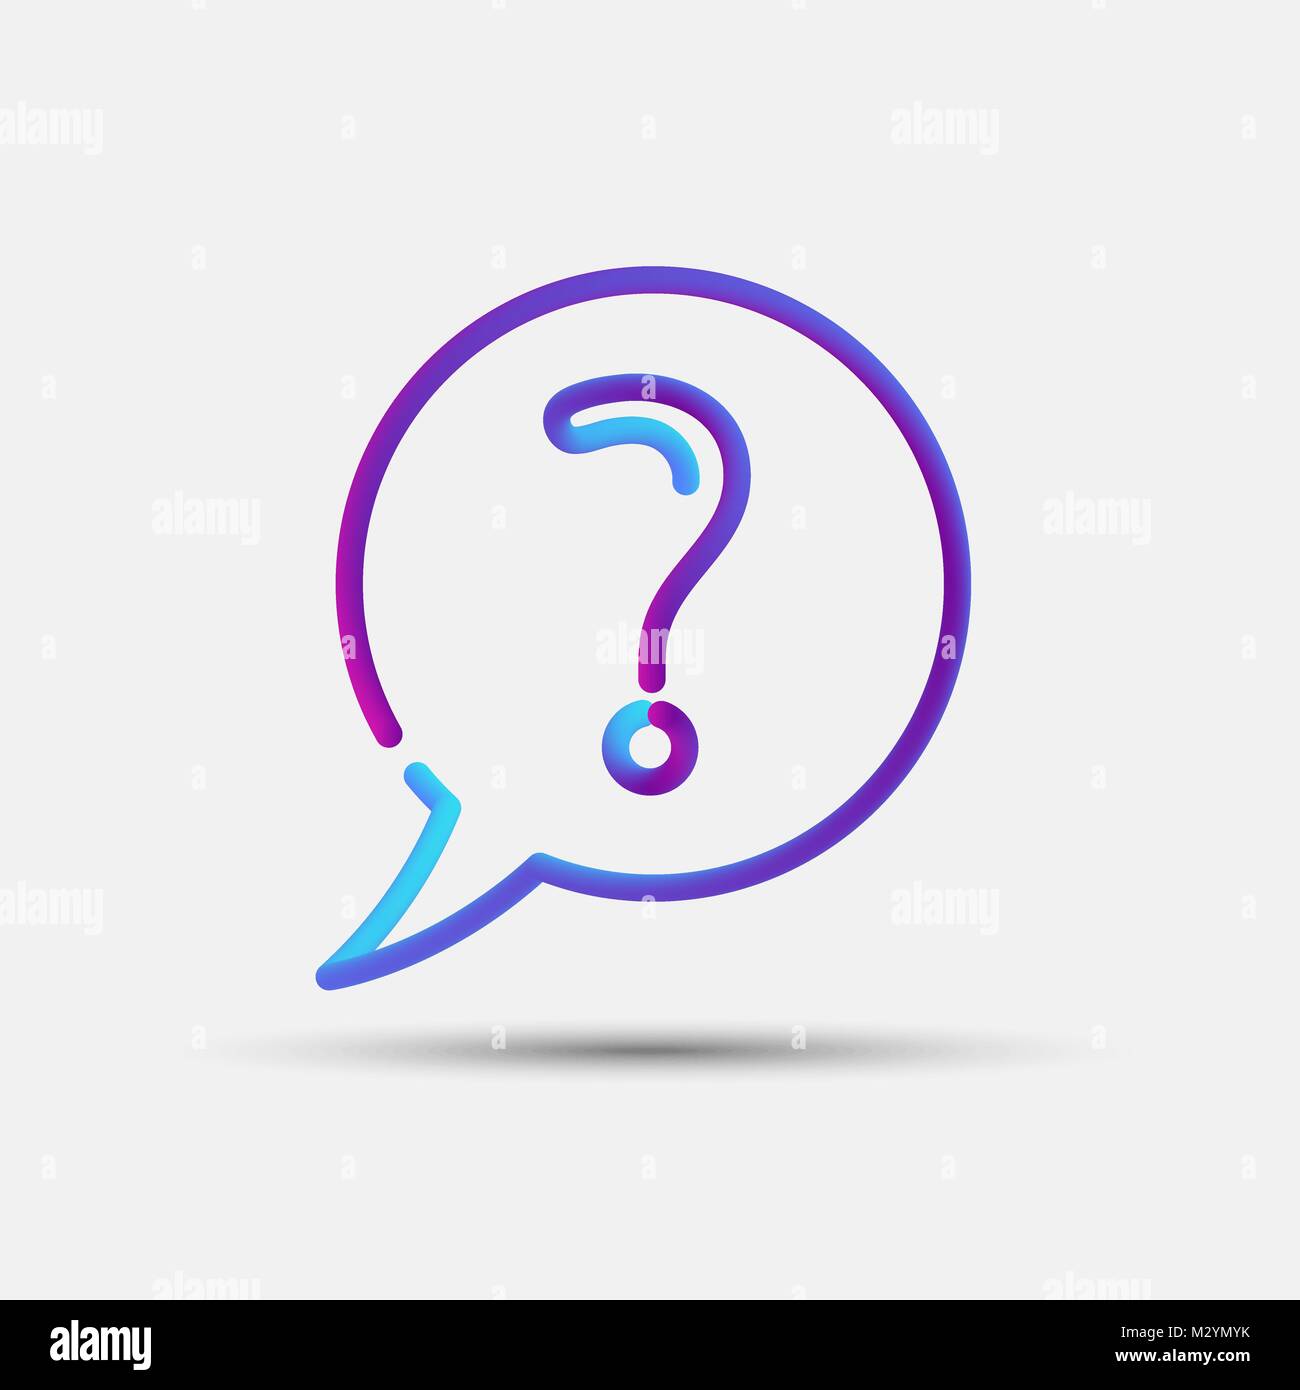 Faq, help, info, question, support blended interlaced creative line icon. Trendy vector liquid 3d cloud question mark icon, logo, sign or emblem Stock Vector